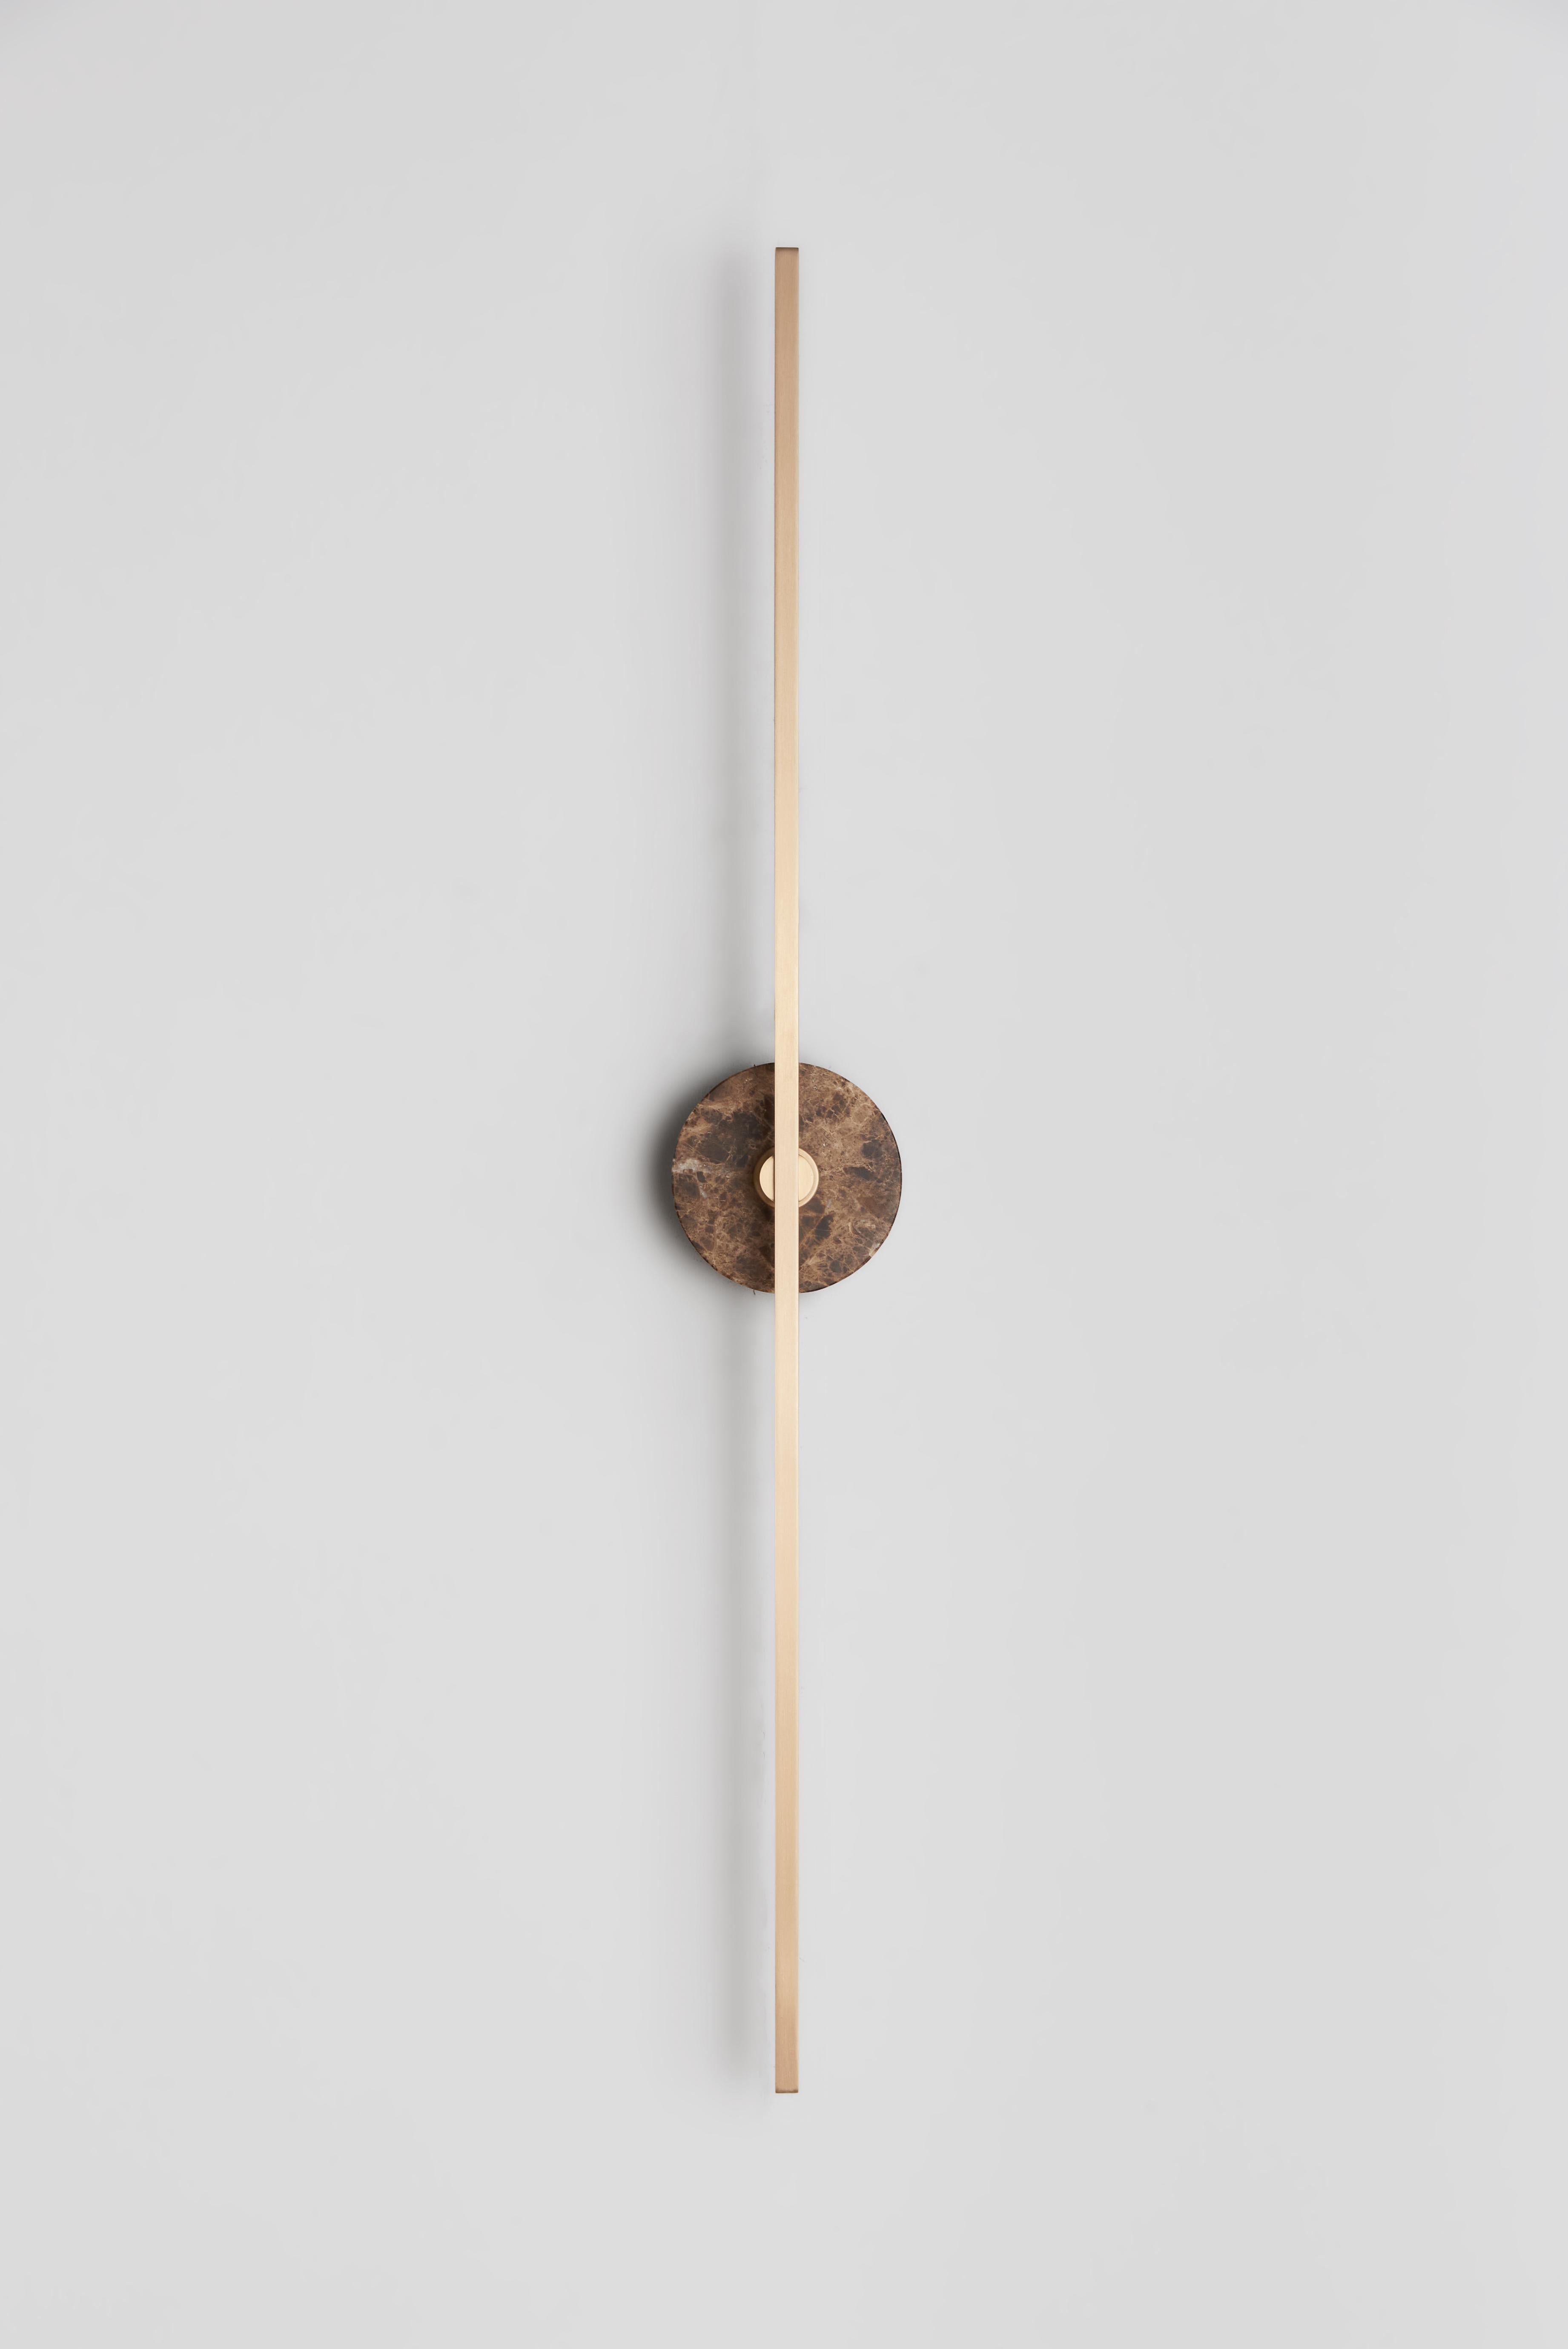 The Stick wall sconce is a contemporary lighting fixture that features a minimalist design with thin brass profiles and advanced LED technology. It emits a warm and diffused light that adds a cozy and inviting atmosphere to any room.

The Brown